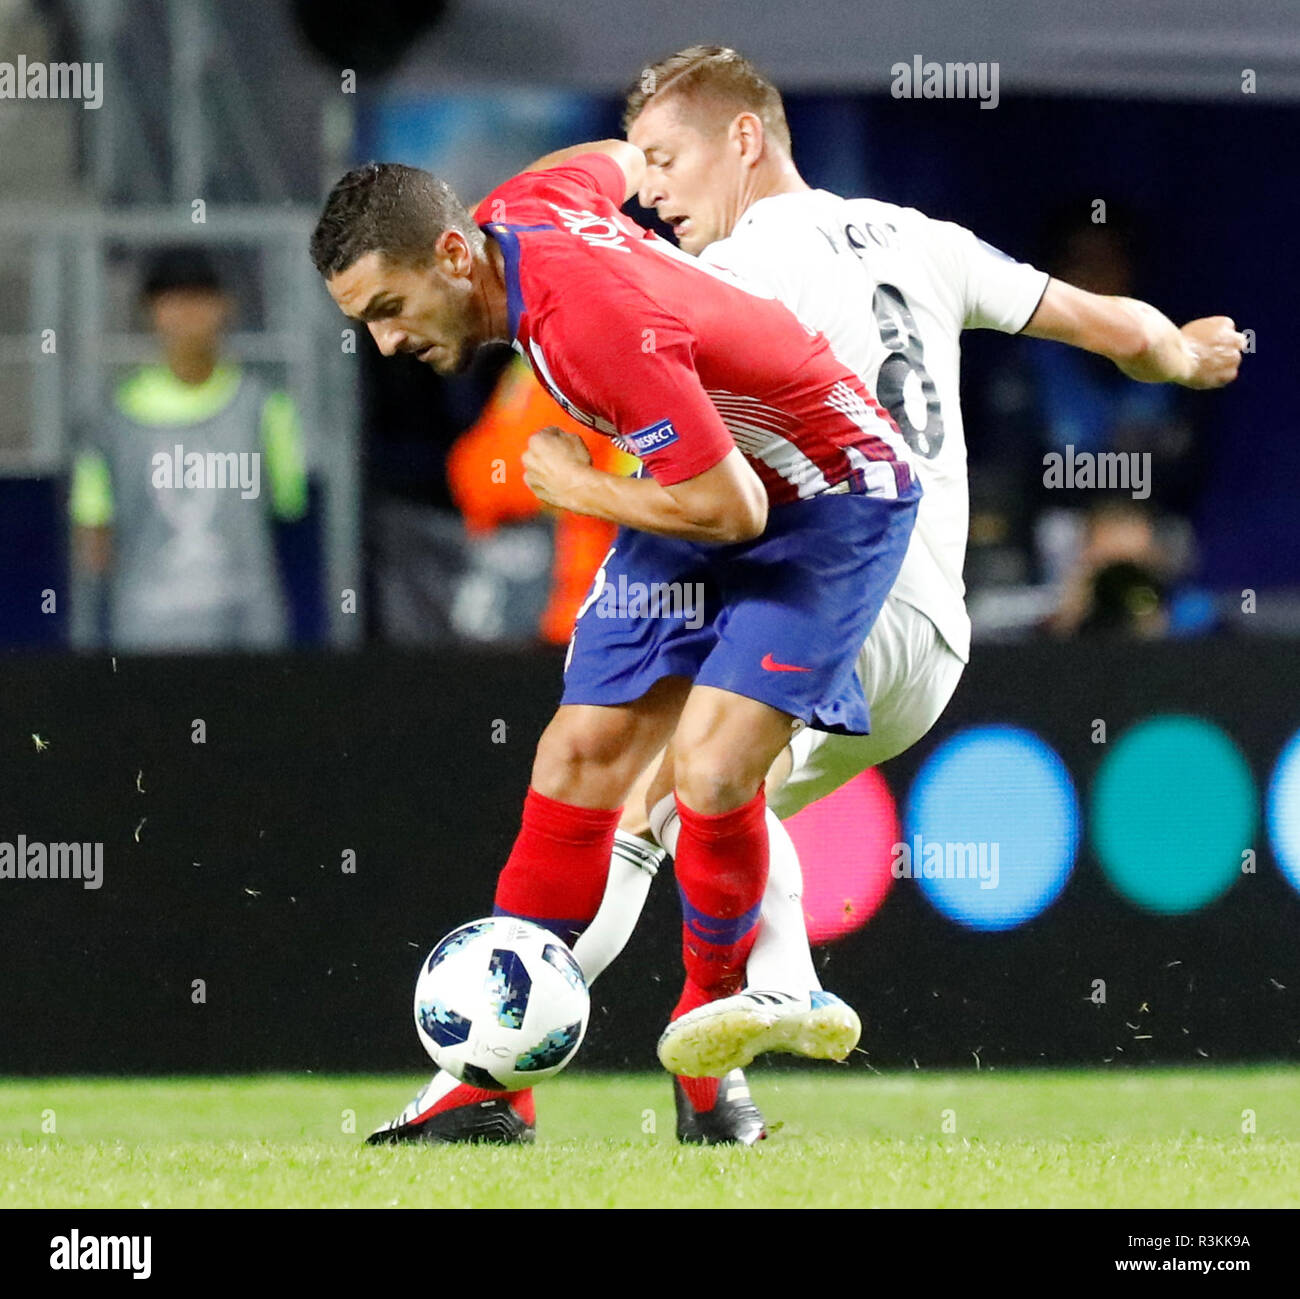 TALLINN, ESTONIA - AUGUST 15: Toni Kroos (R) of Real Madrid and Koke of Atletico Madrid vie for the ball during the UEFA Super Cup match between Real Madrid and Atletico Madrid at A Le Coq Arena on August 15, 2018 in Tallinn, Estonia. (MB Media) Stock Photo